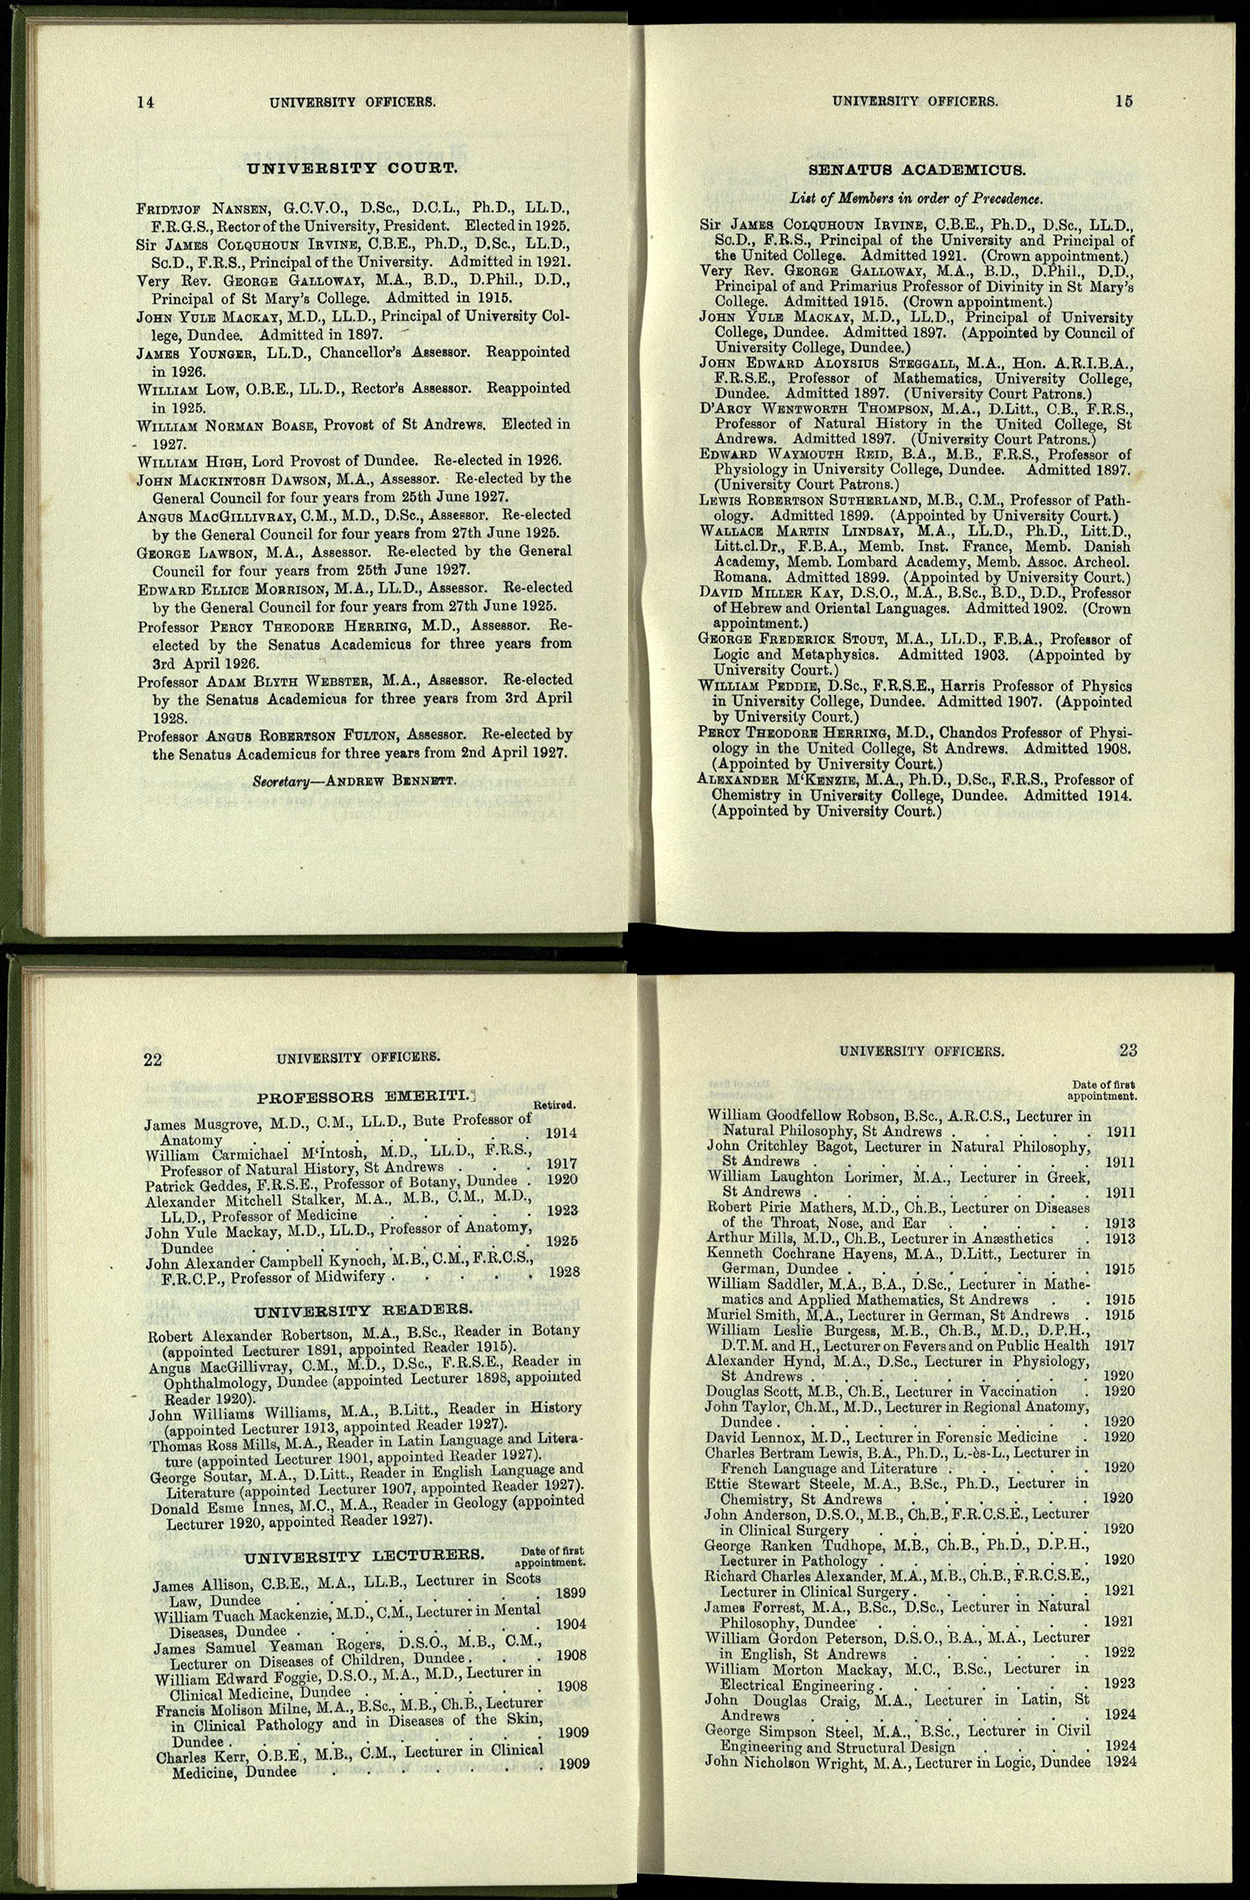 1928/9. Top Left: List of members of University Court. The Calendar is the only and the definitive place to find such information annually. Top right: 1928/9 The Calendar gives a guide to the Senatus order of precedence, with seniority of professors clearly given by date of appointment. Bottom left: 1928/9 Date of appointment and promotion of staff is recorded. Bottom right: 1928/9 This list of staff includes early female appointments as lecturers. Ettie Steele was the first PhD student in the University and worked closely with Principal James Irvine until his death in office in 1952.